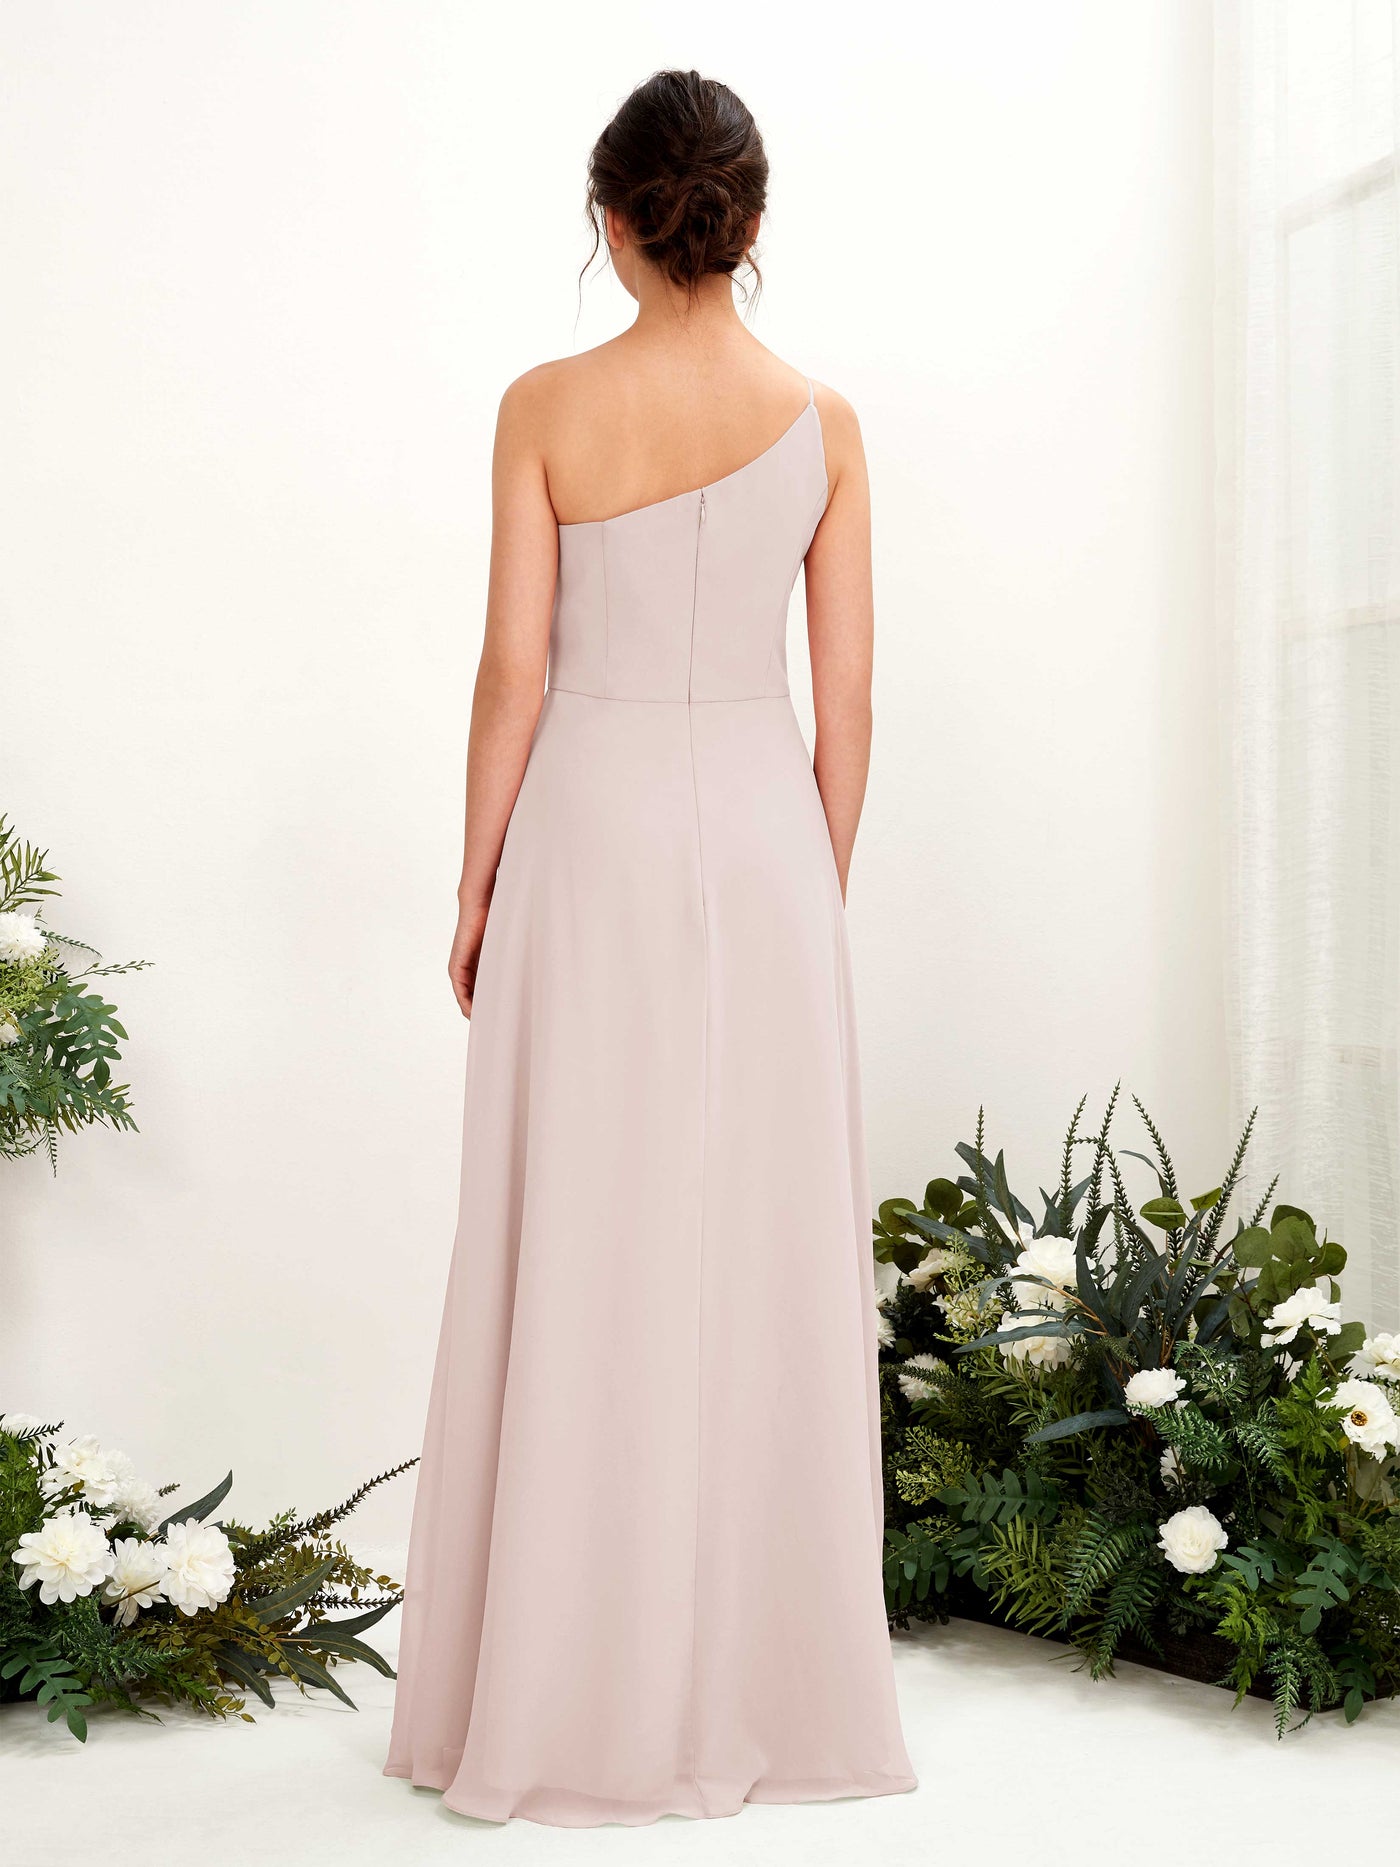 Biscotti Bridesmaid Dresses Bridesmaid Dress A-line Chiffon One Shoulder Full Length Sleeveless Wedding Party Dress (81225735)#color_biscotti